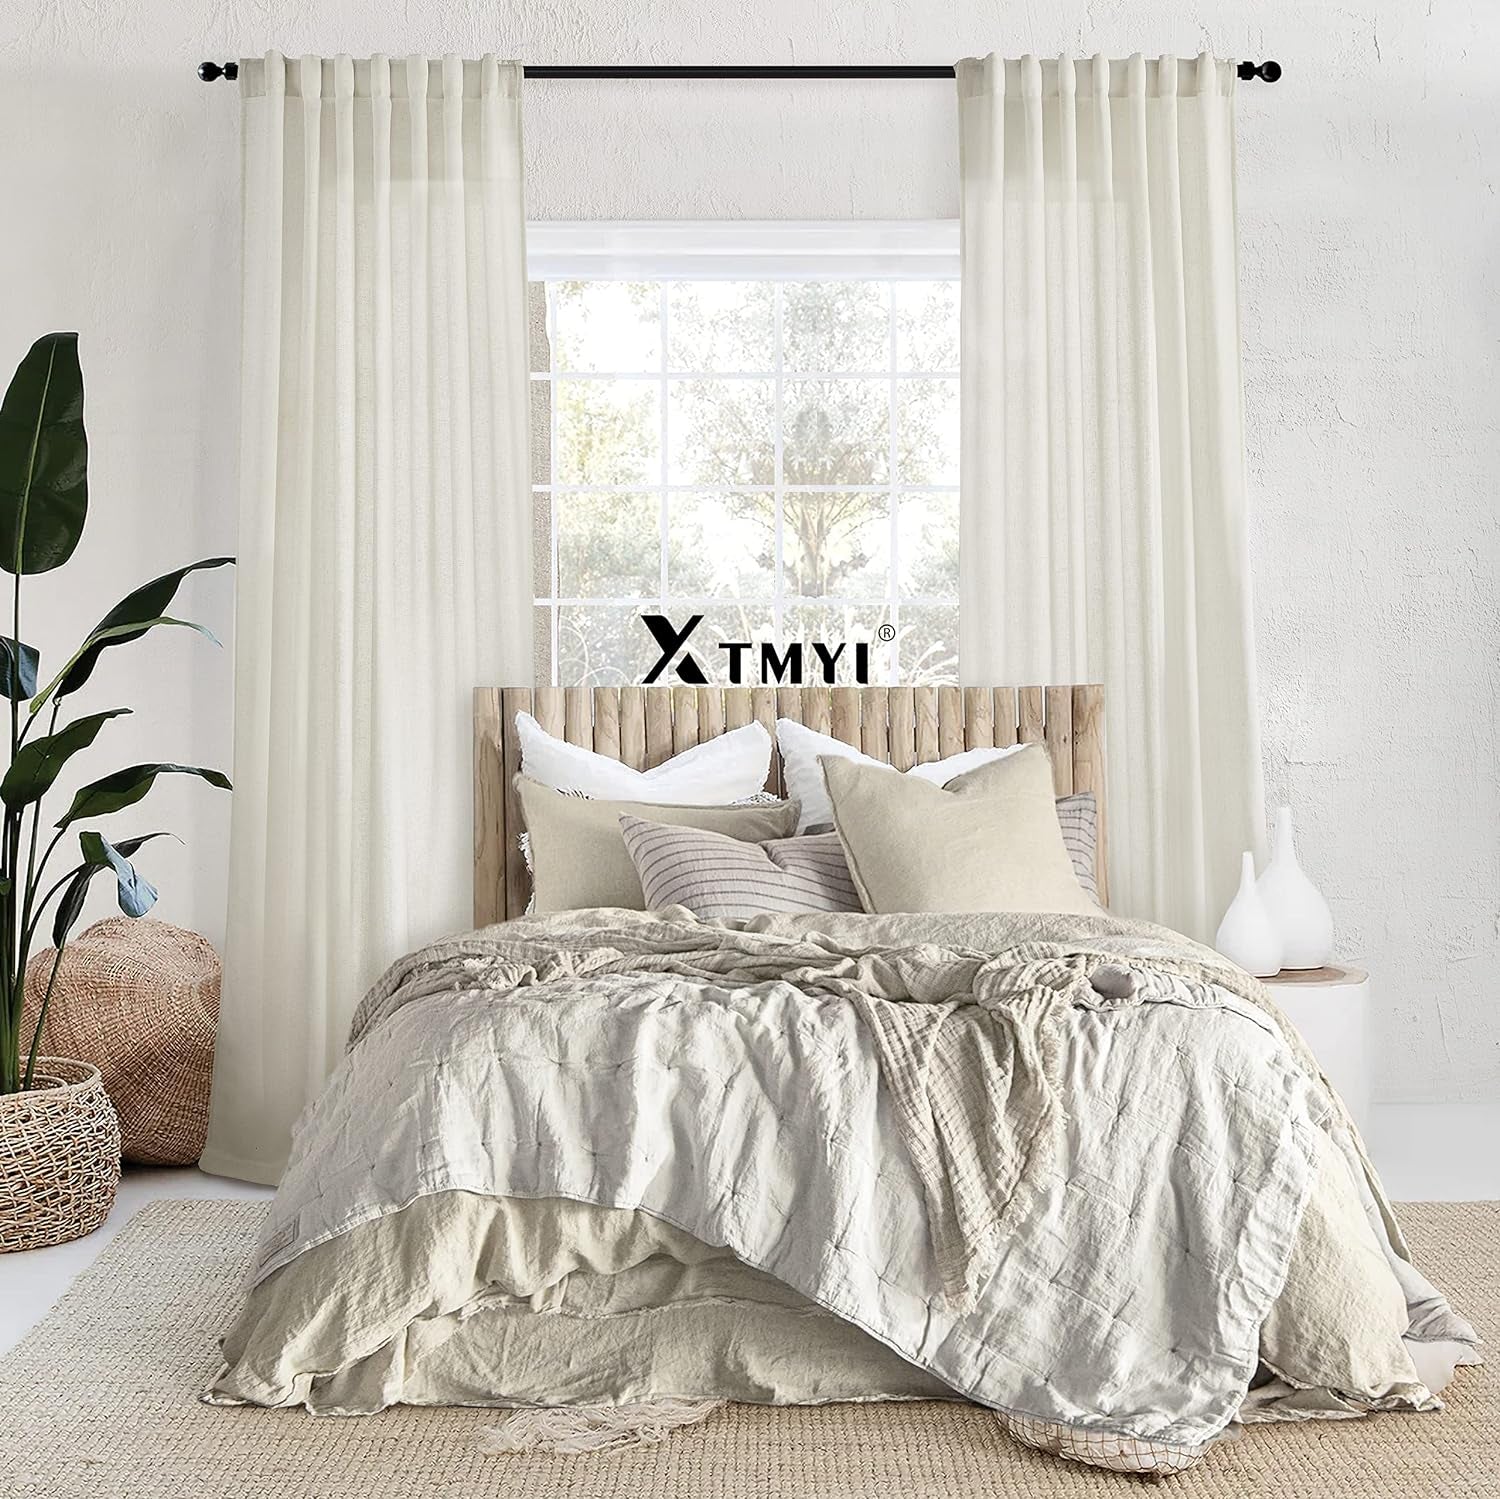 XTMYI Linen Cotton Farmhouse Curtains for Living Room Bedroom 84 Inches Long Two Sheer Hook Belt Pleated Back Tab Birch off White Ivory Neutral Boho Sour Cream Curtain Drapes 84 Length 2 Panels Set  XTMYI   